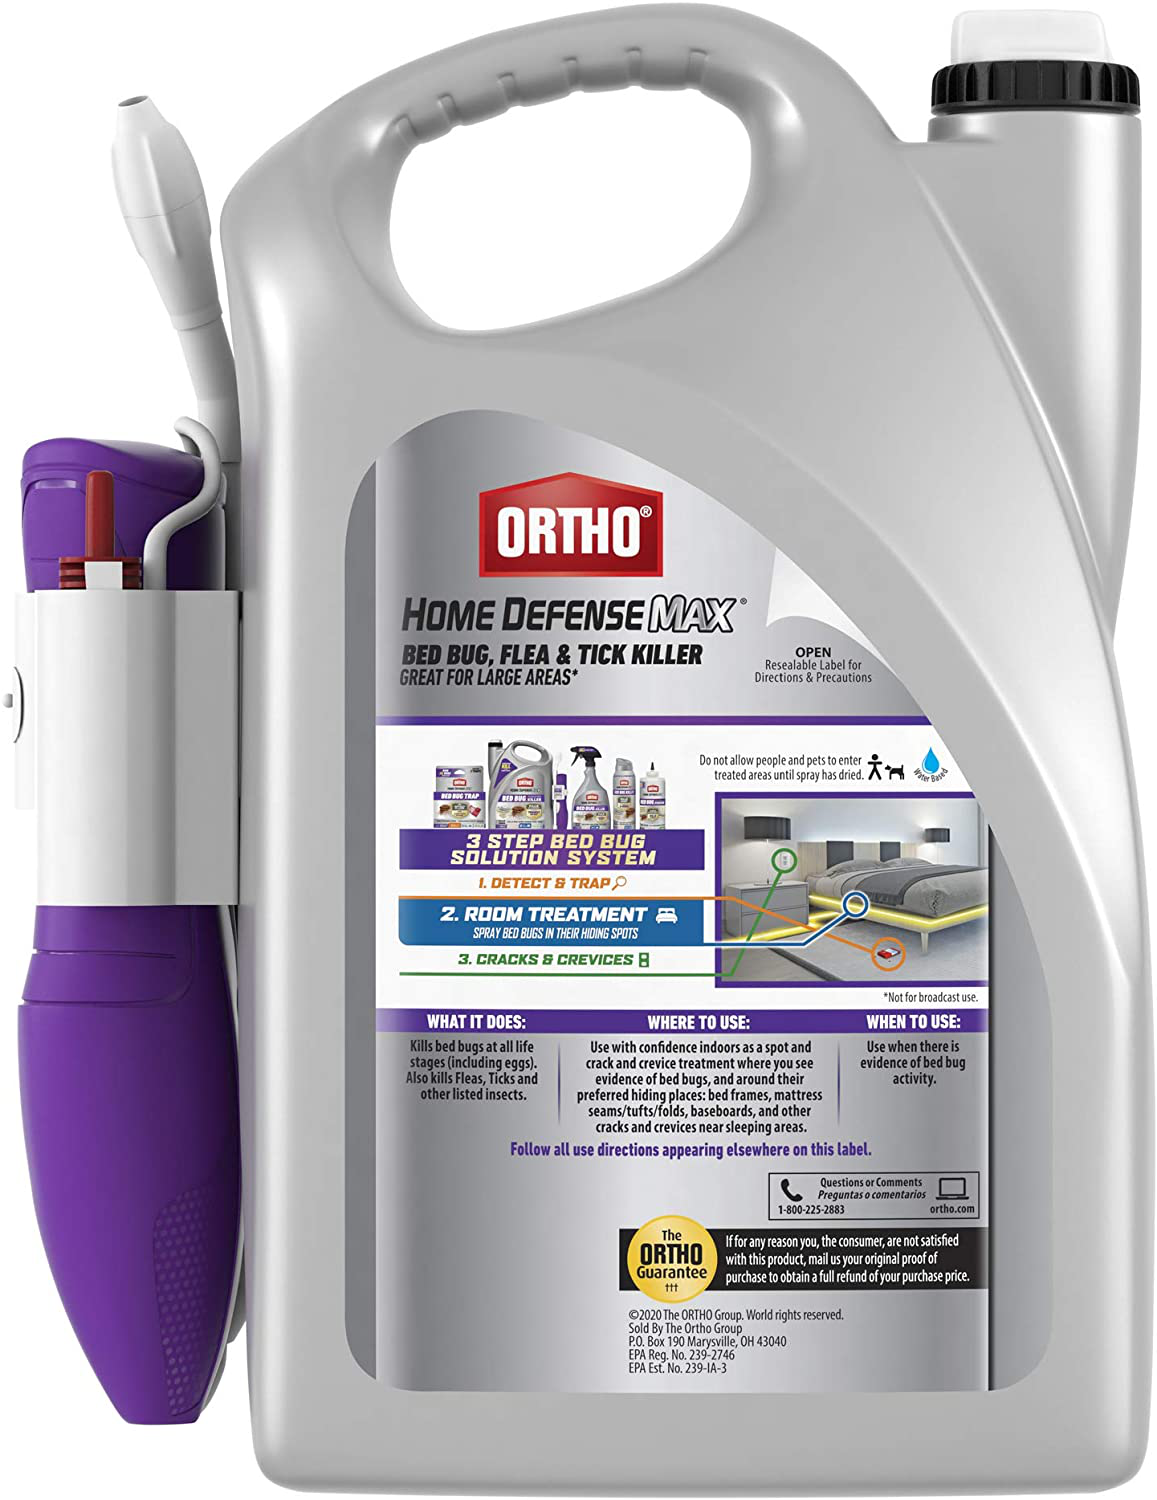 Ortho Home Defense Max Bed Bug, Flea and Tick Killer - With Ready-to-Use Comfort Wand, Kills Bed Bugs and Bed Bug Eggs, Bed Bug Spray Also Kills Fleas and Ticks, 1 gal.